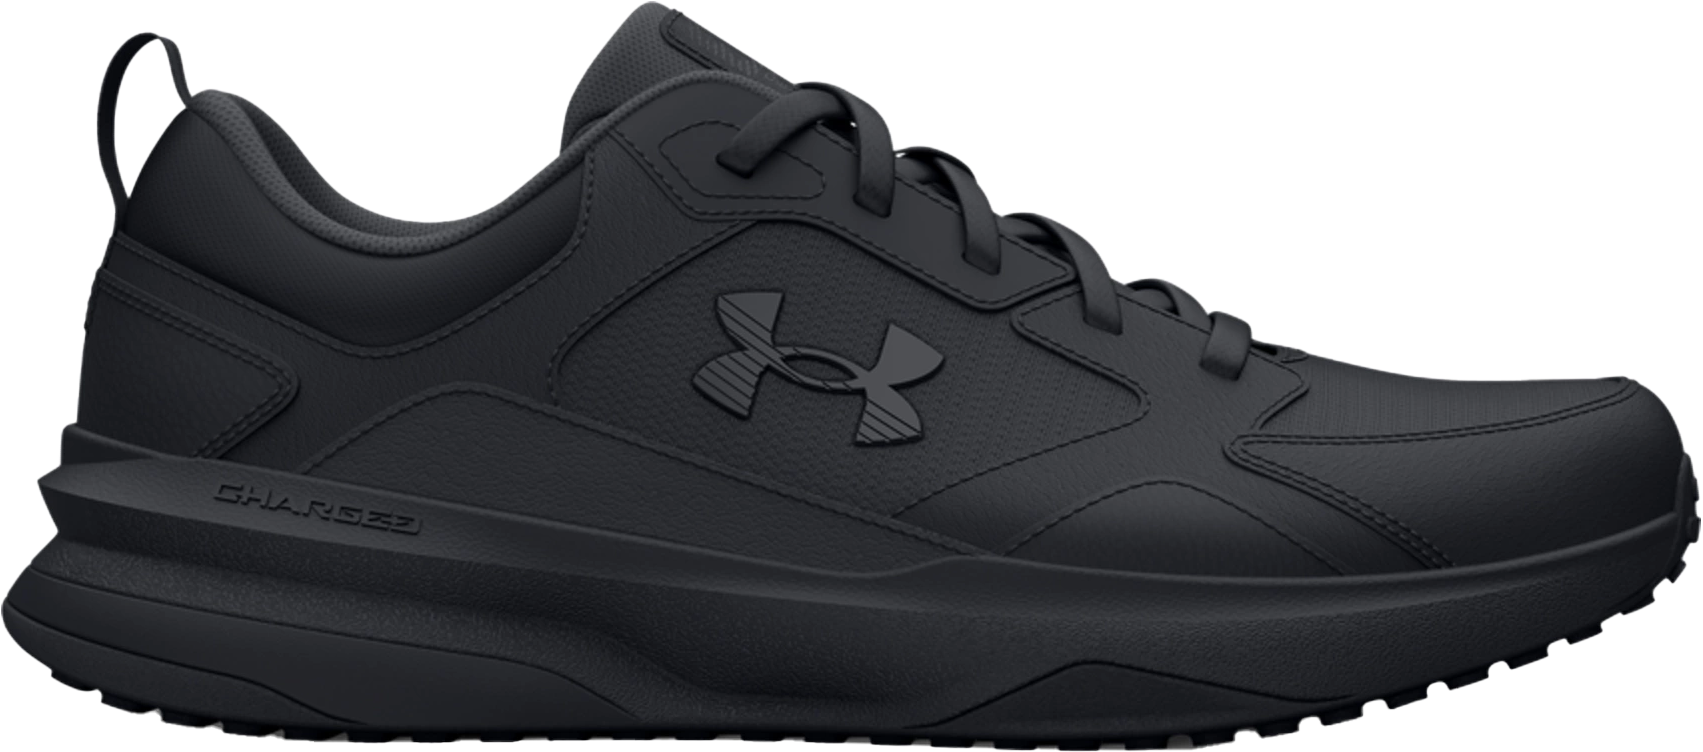 Fitness topánky Under Armour UA Charged Edge-BLK